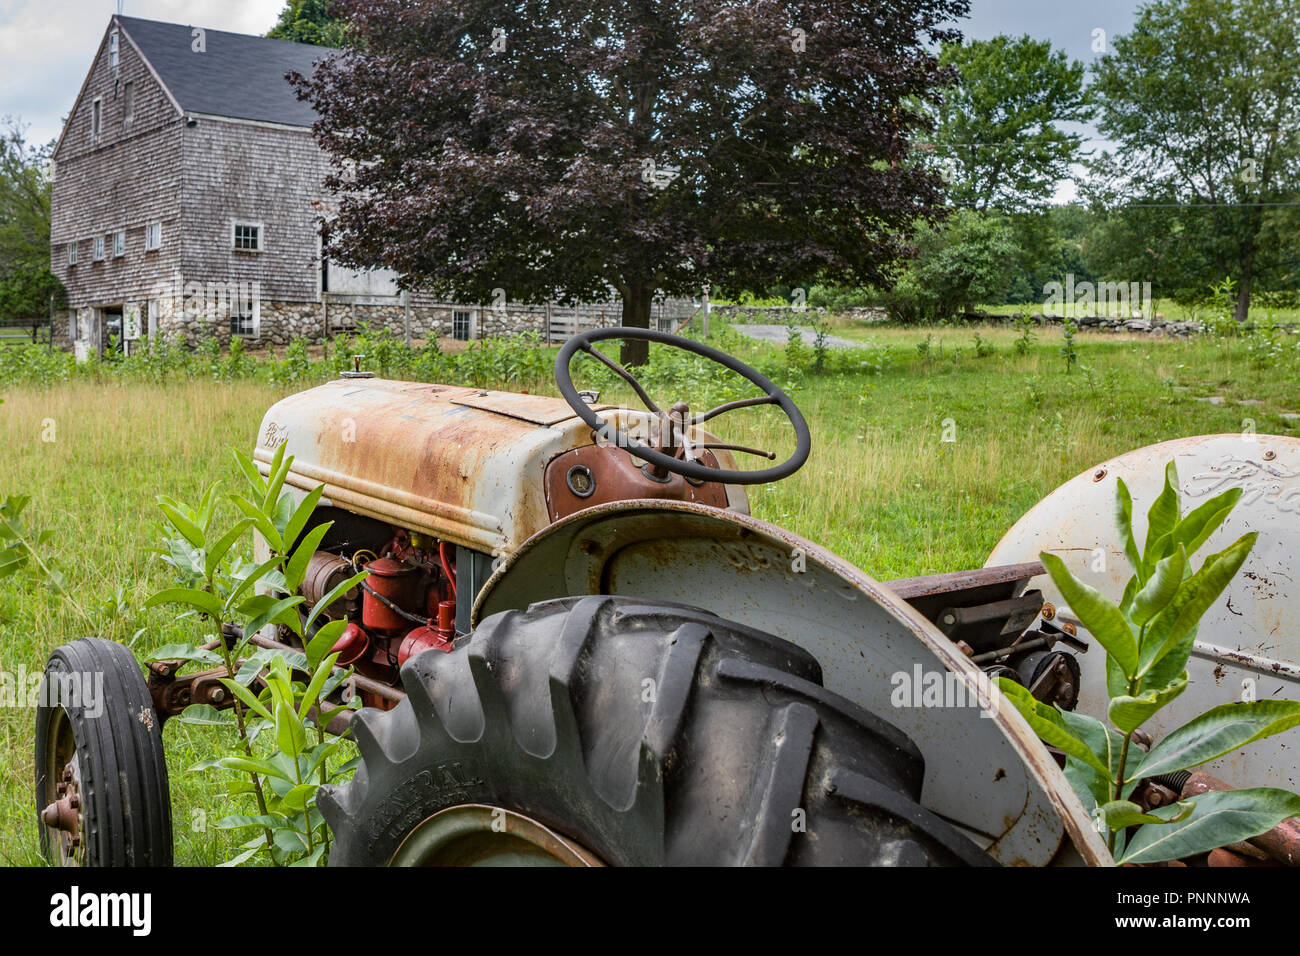 An old Ford tractor at a farm Stock Photo